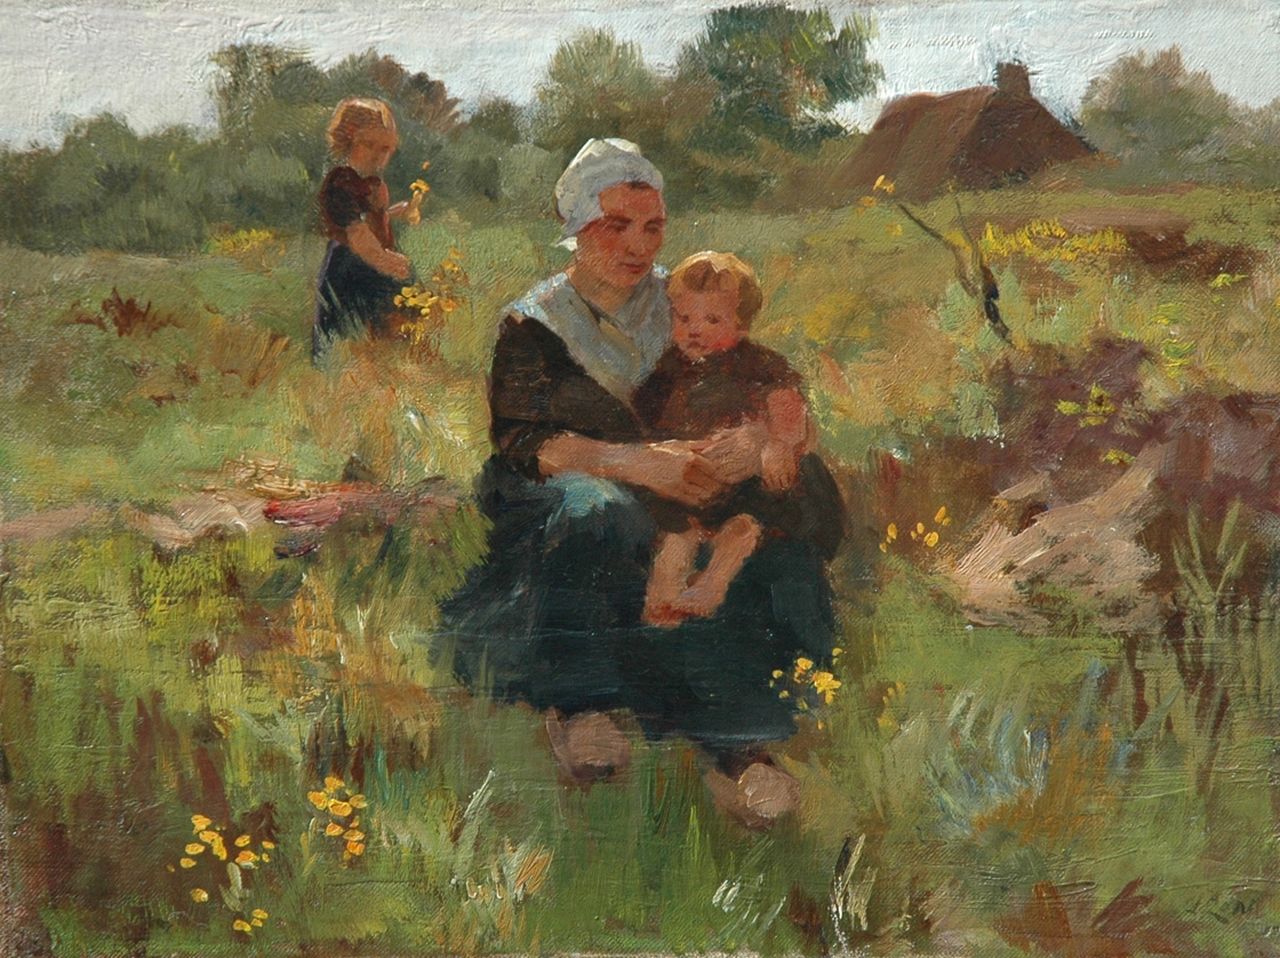 Zon J.A.  | Jacob Abraham 'Jacques' Zon, A summerday in the fields, oil on canvas laid down on panel 27.9 x 37.5 cm, signed l.r.